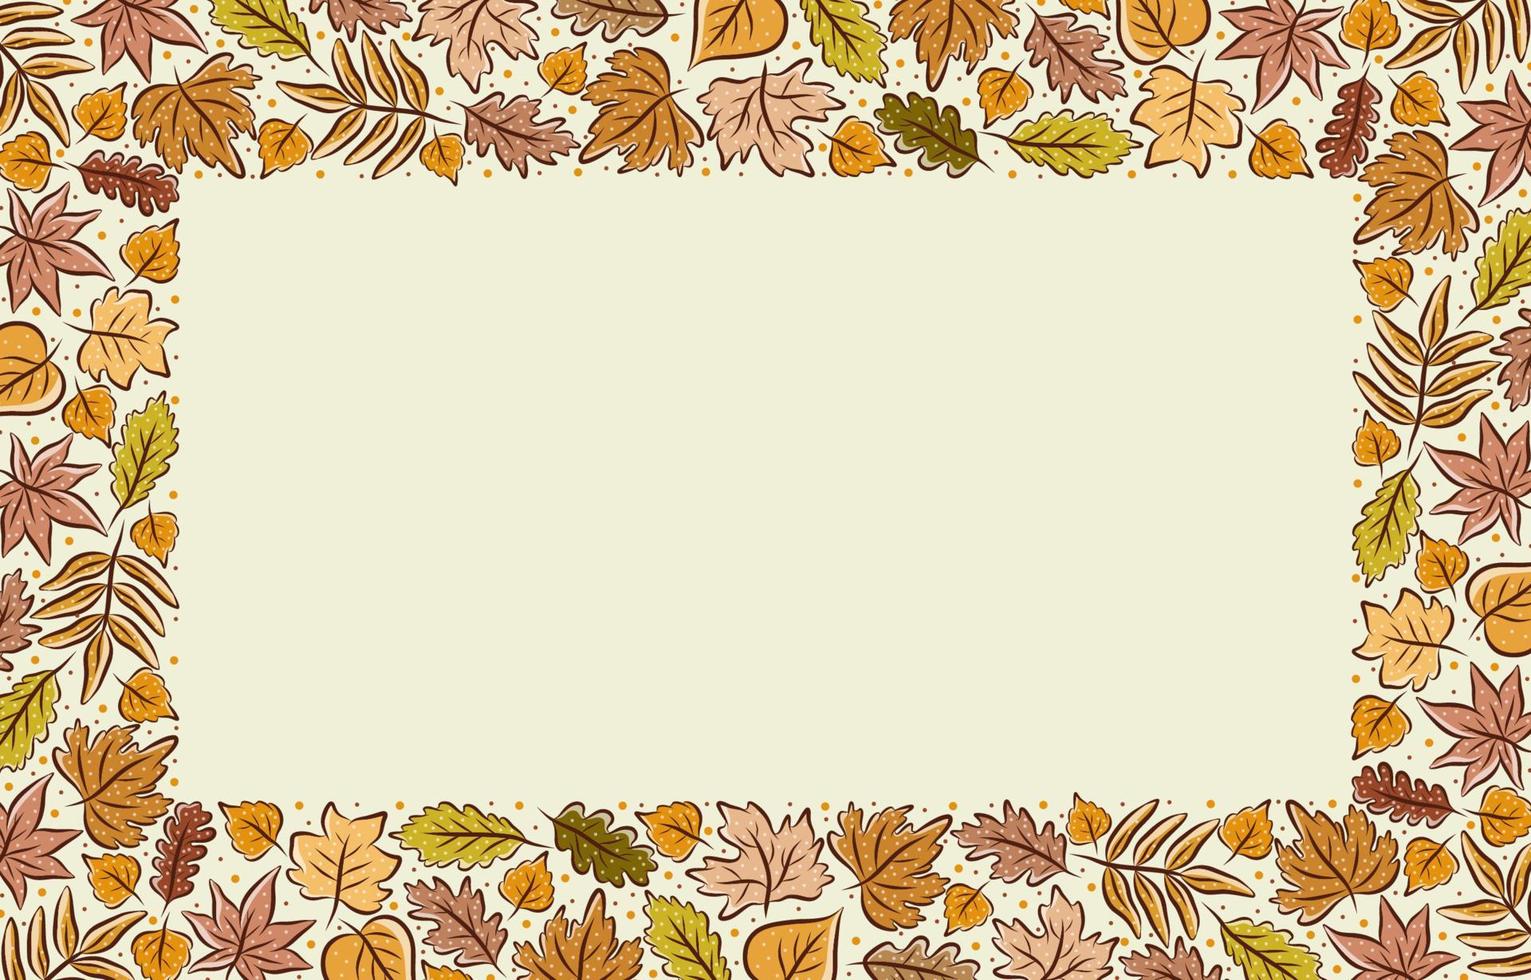 Nature Hand Drawn Floral Border Background vector